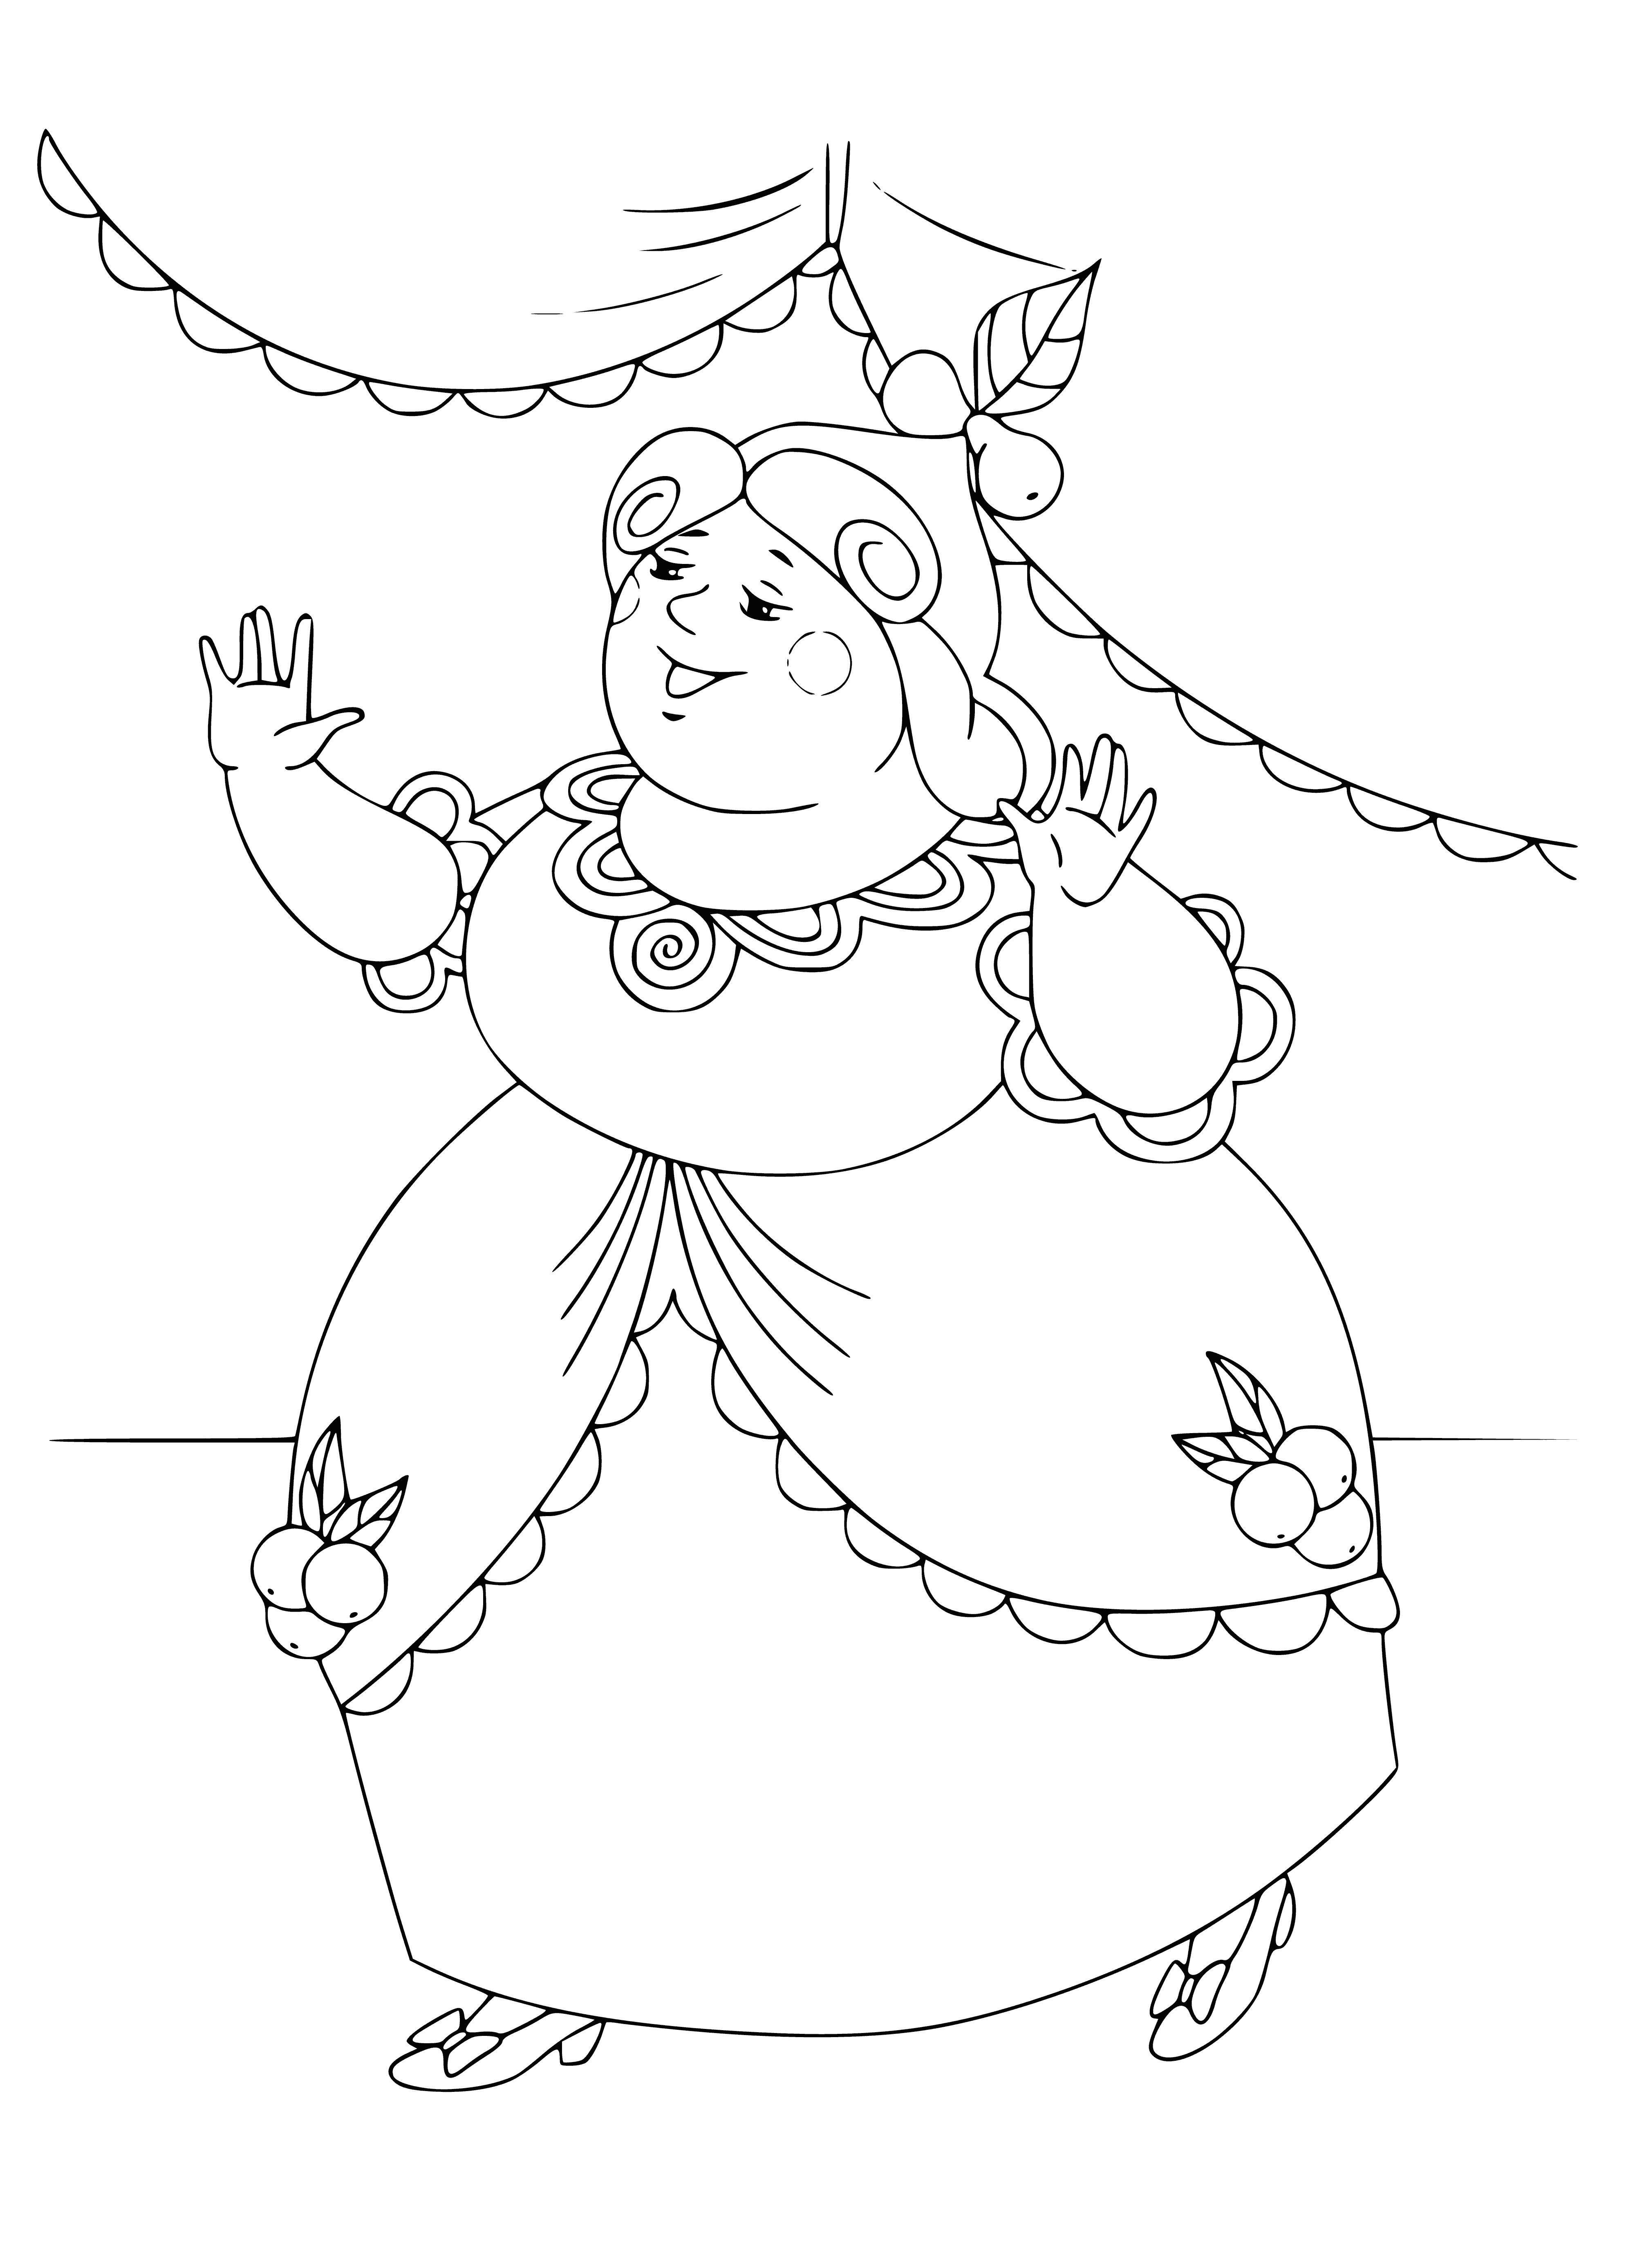 coloring page: Cinderella's stepsister has a torn dress, messy hair, and a black eye, suggesting she's been in a fight.